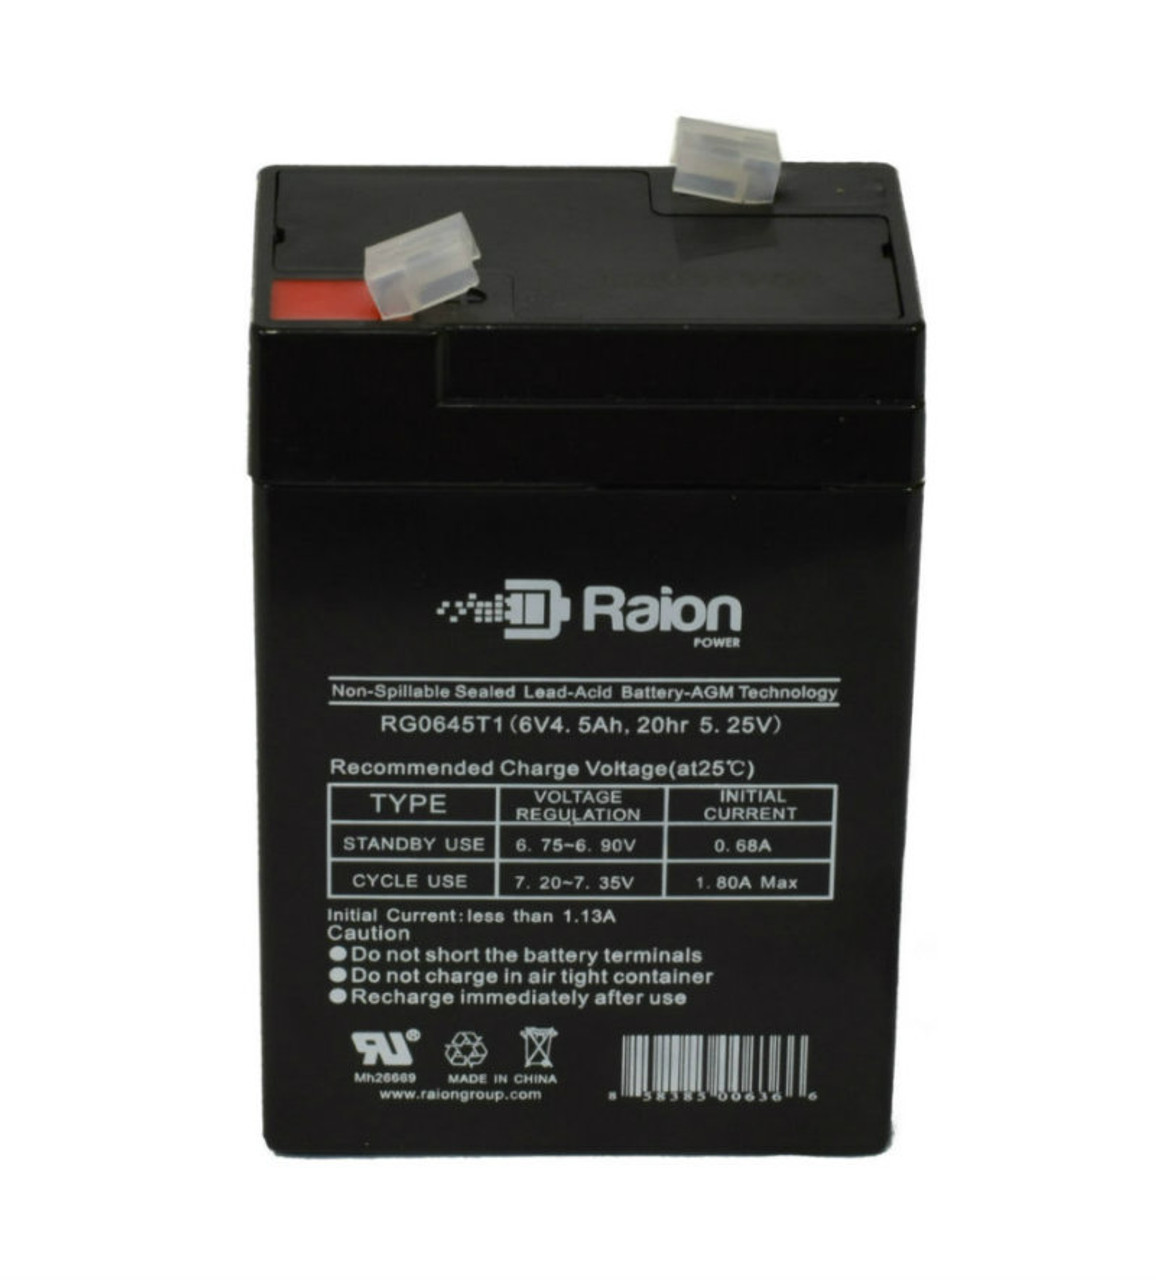 Raion Power RG0645T1 Replacement Battery Cartridge for Light Alarms KB13CP